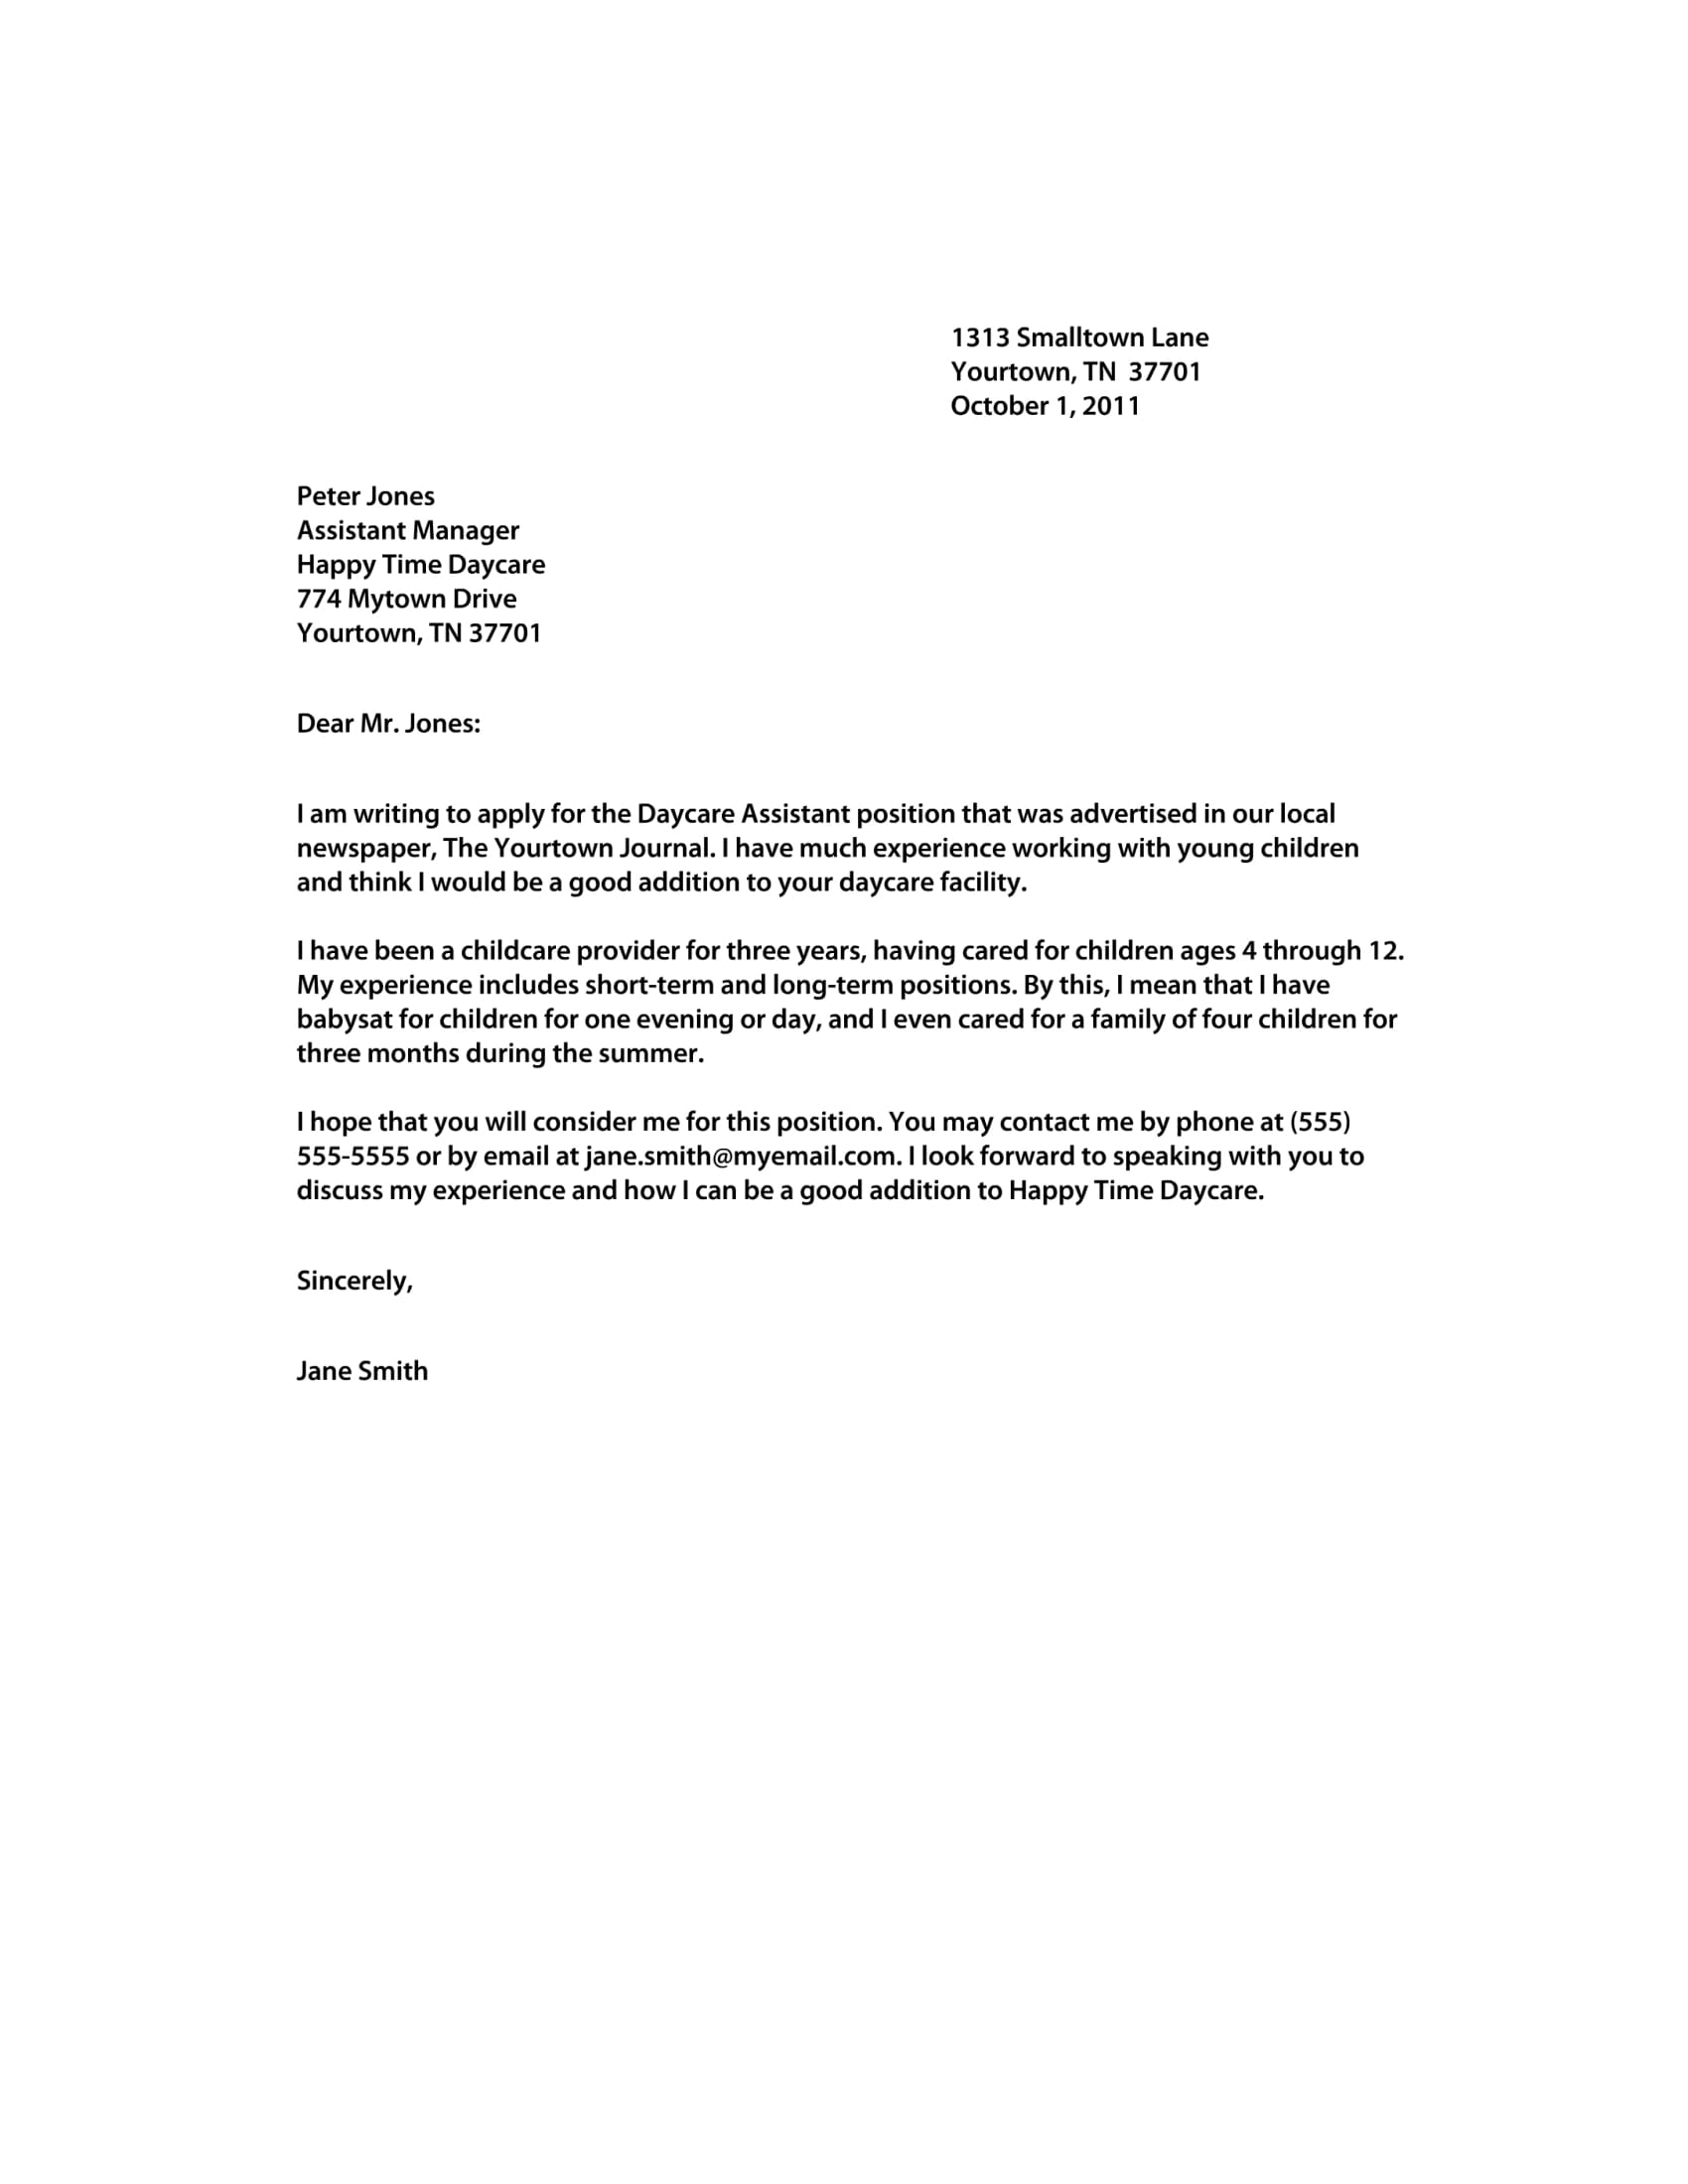 example cover letter sample